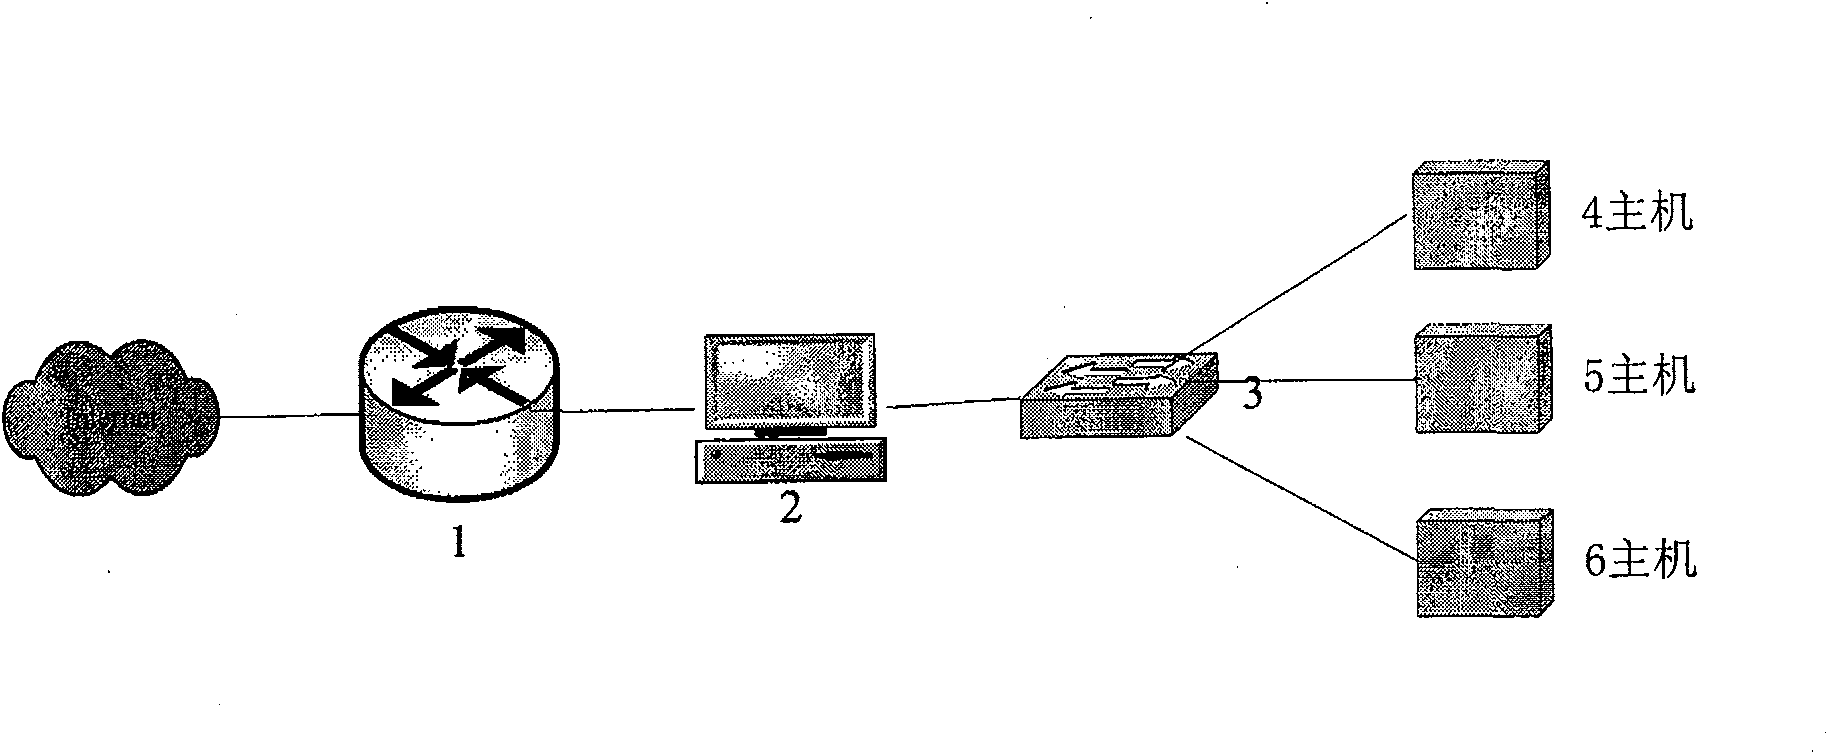 Content filtering gateway realizing method based on network filter